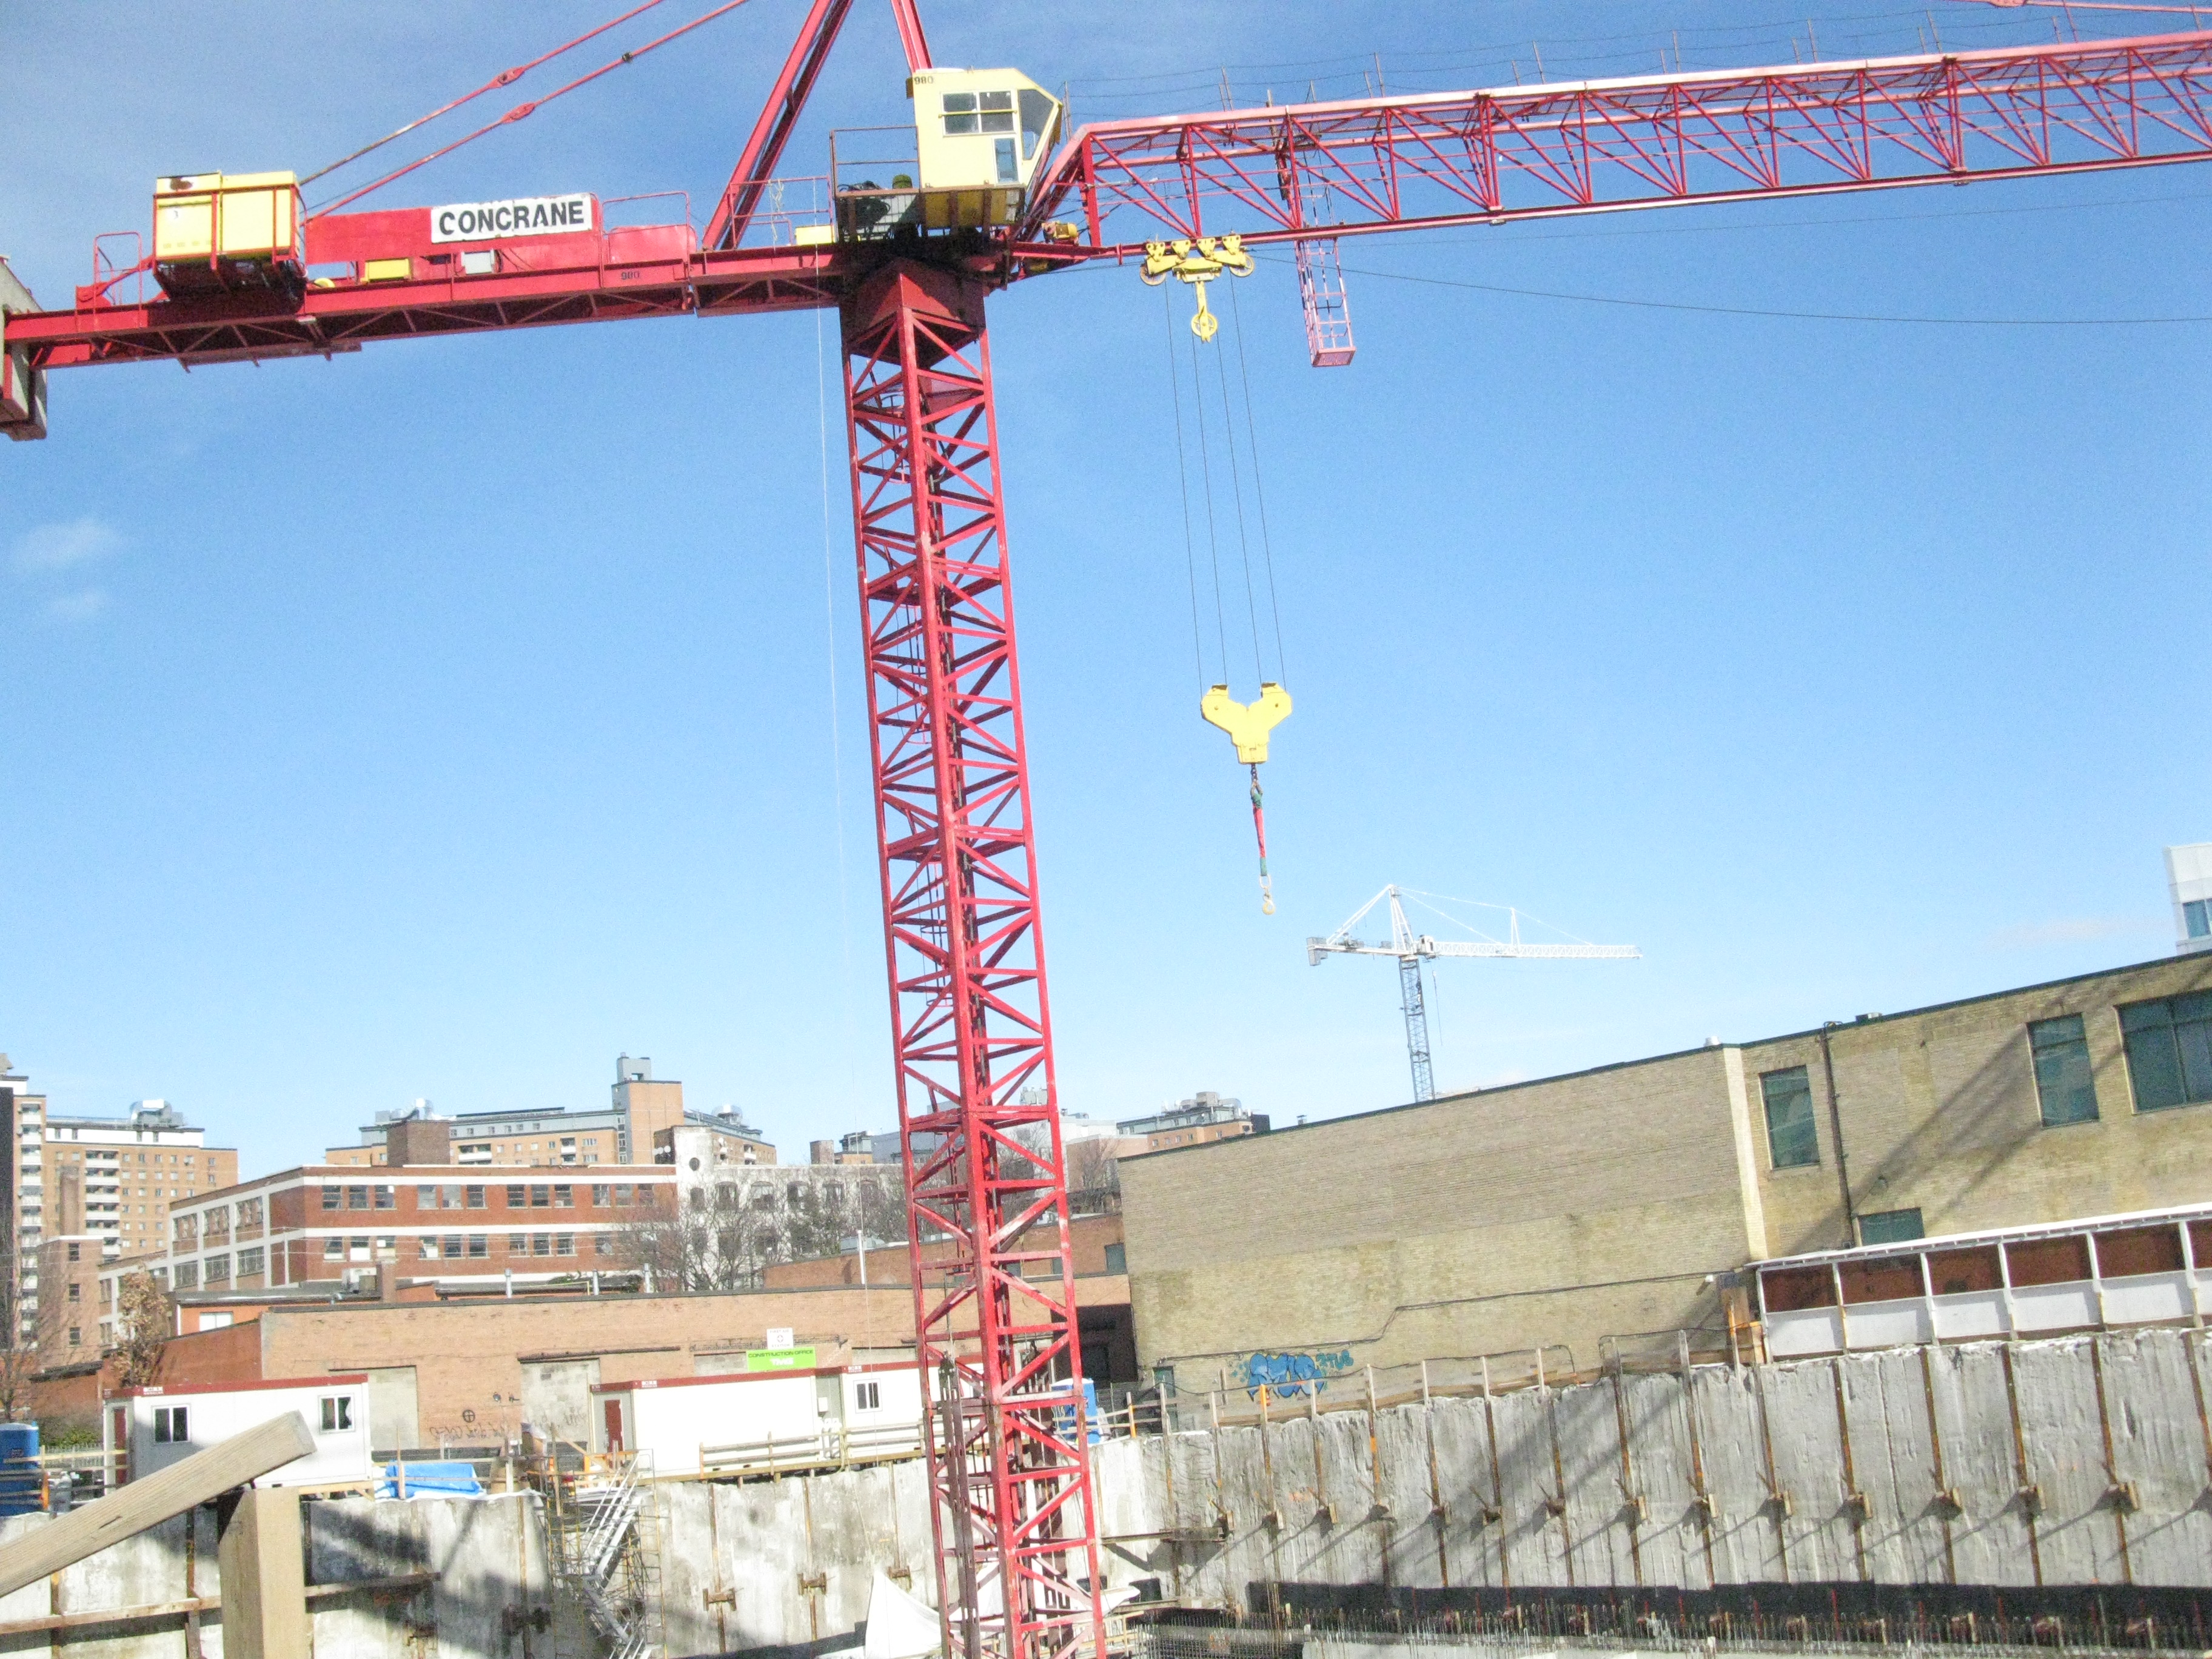 Construction, corner of adelaide and princess, 2013 02 18 -cp.jpg photo